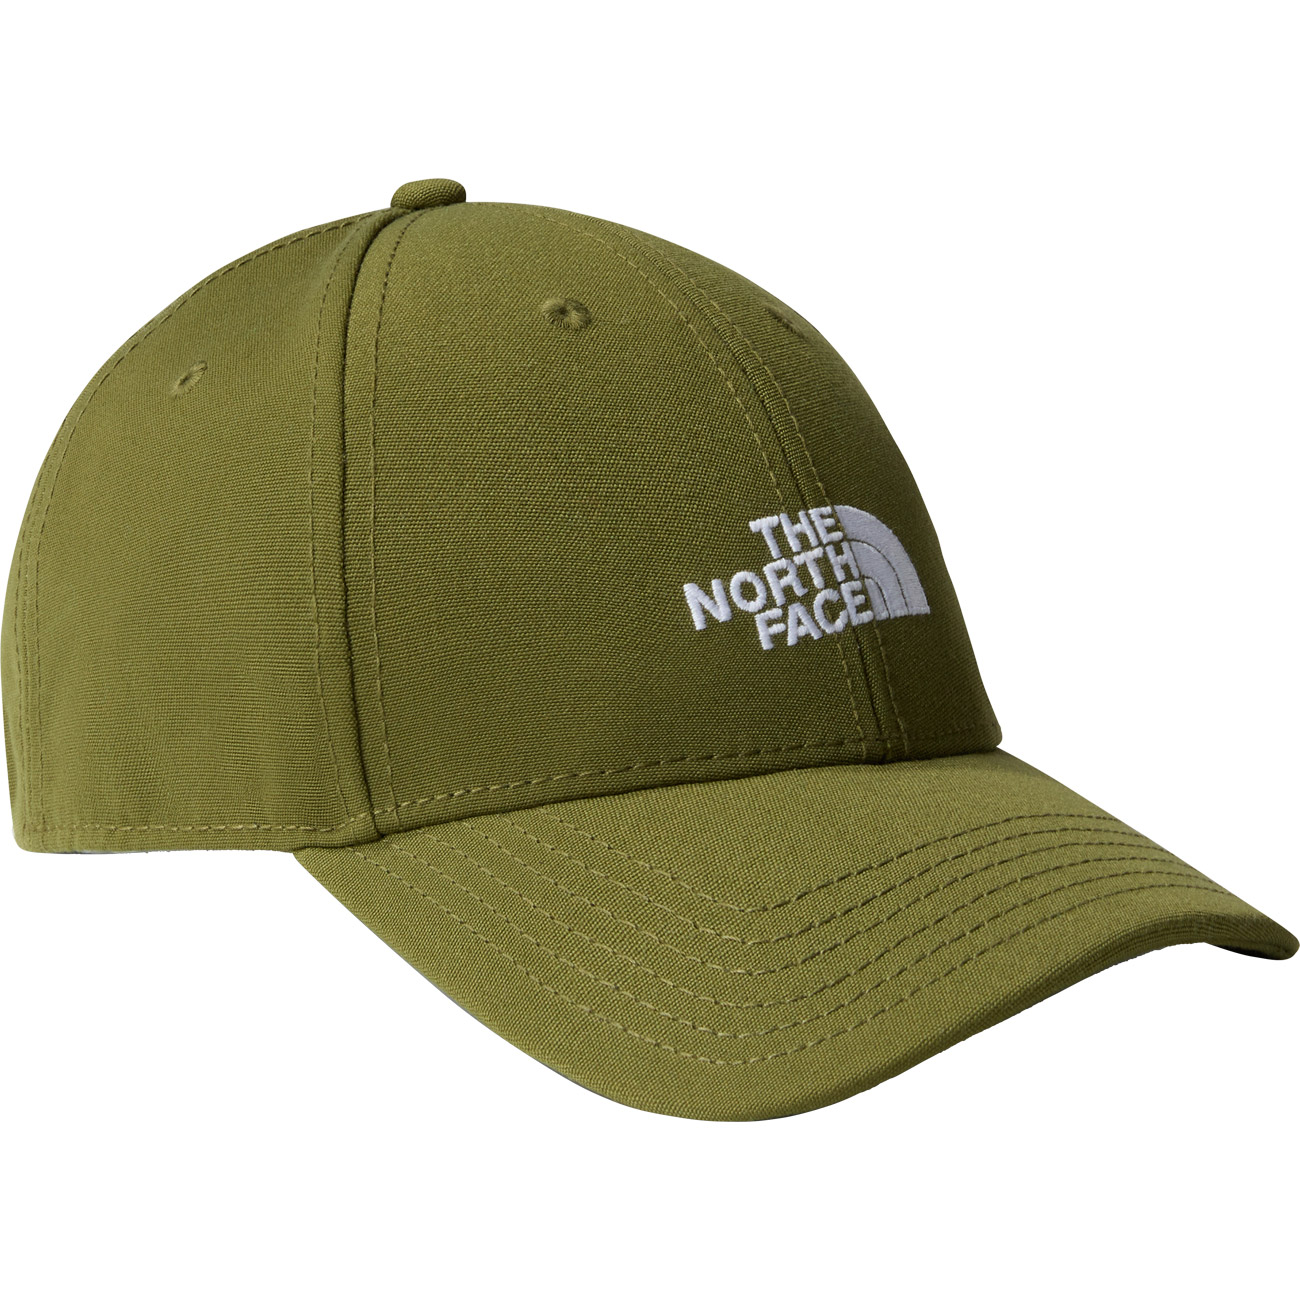 The North Face Cap Recycled 66 Classic von The North Face